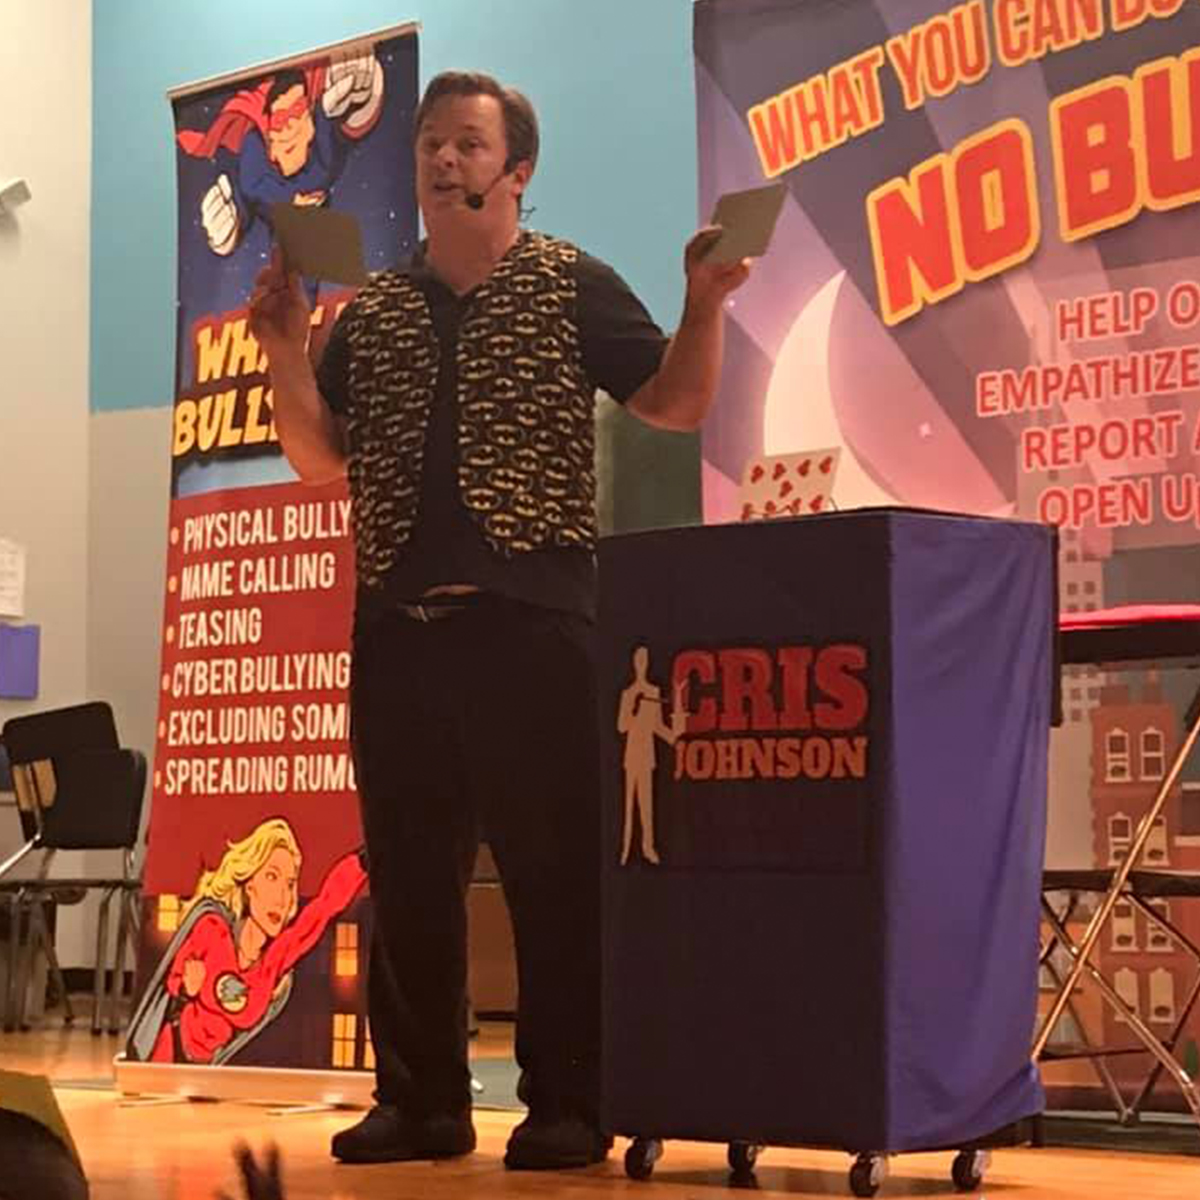 School assembly performer Cris Johnson at a bully prevention school assembly